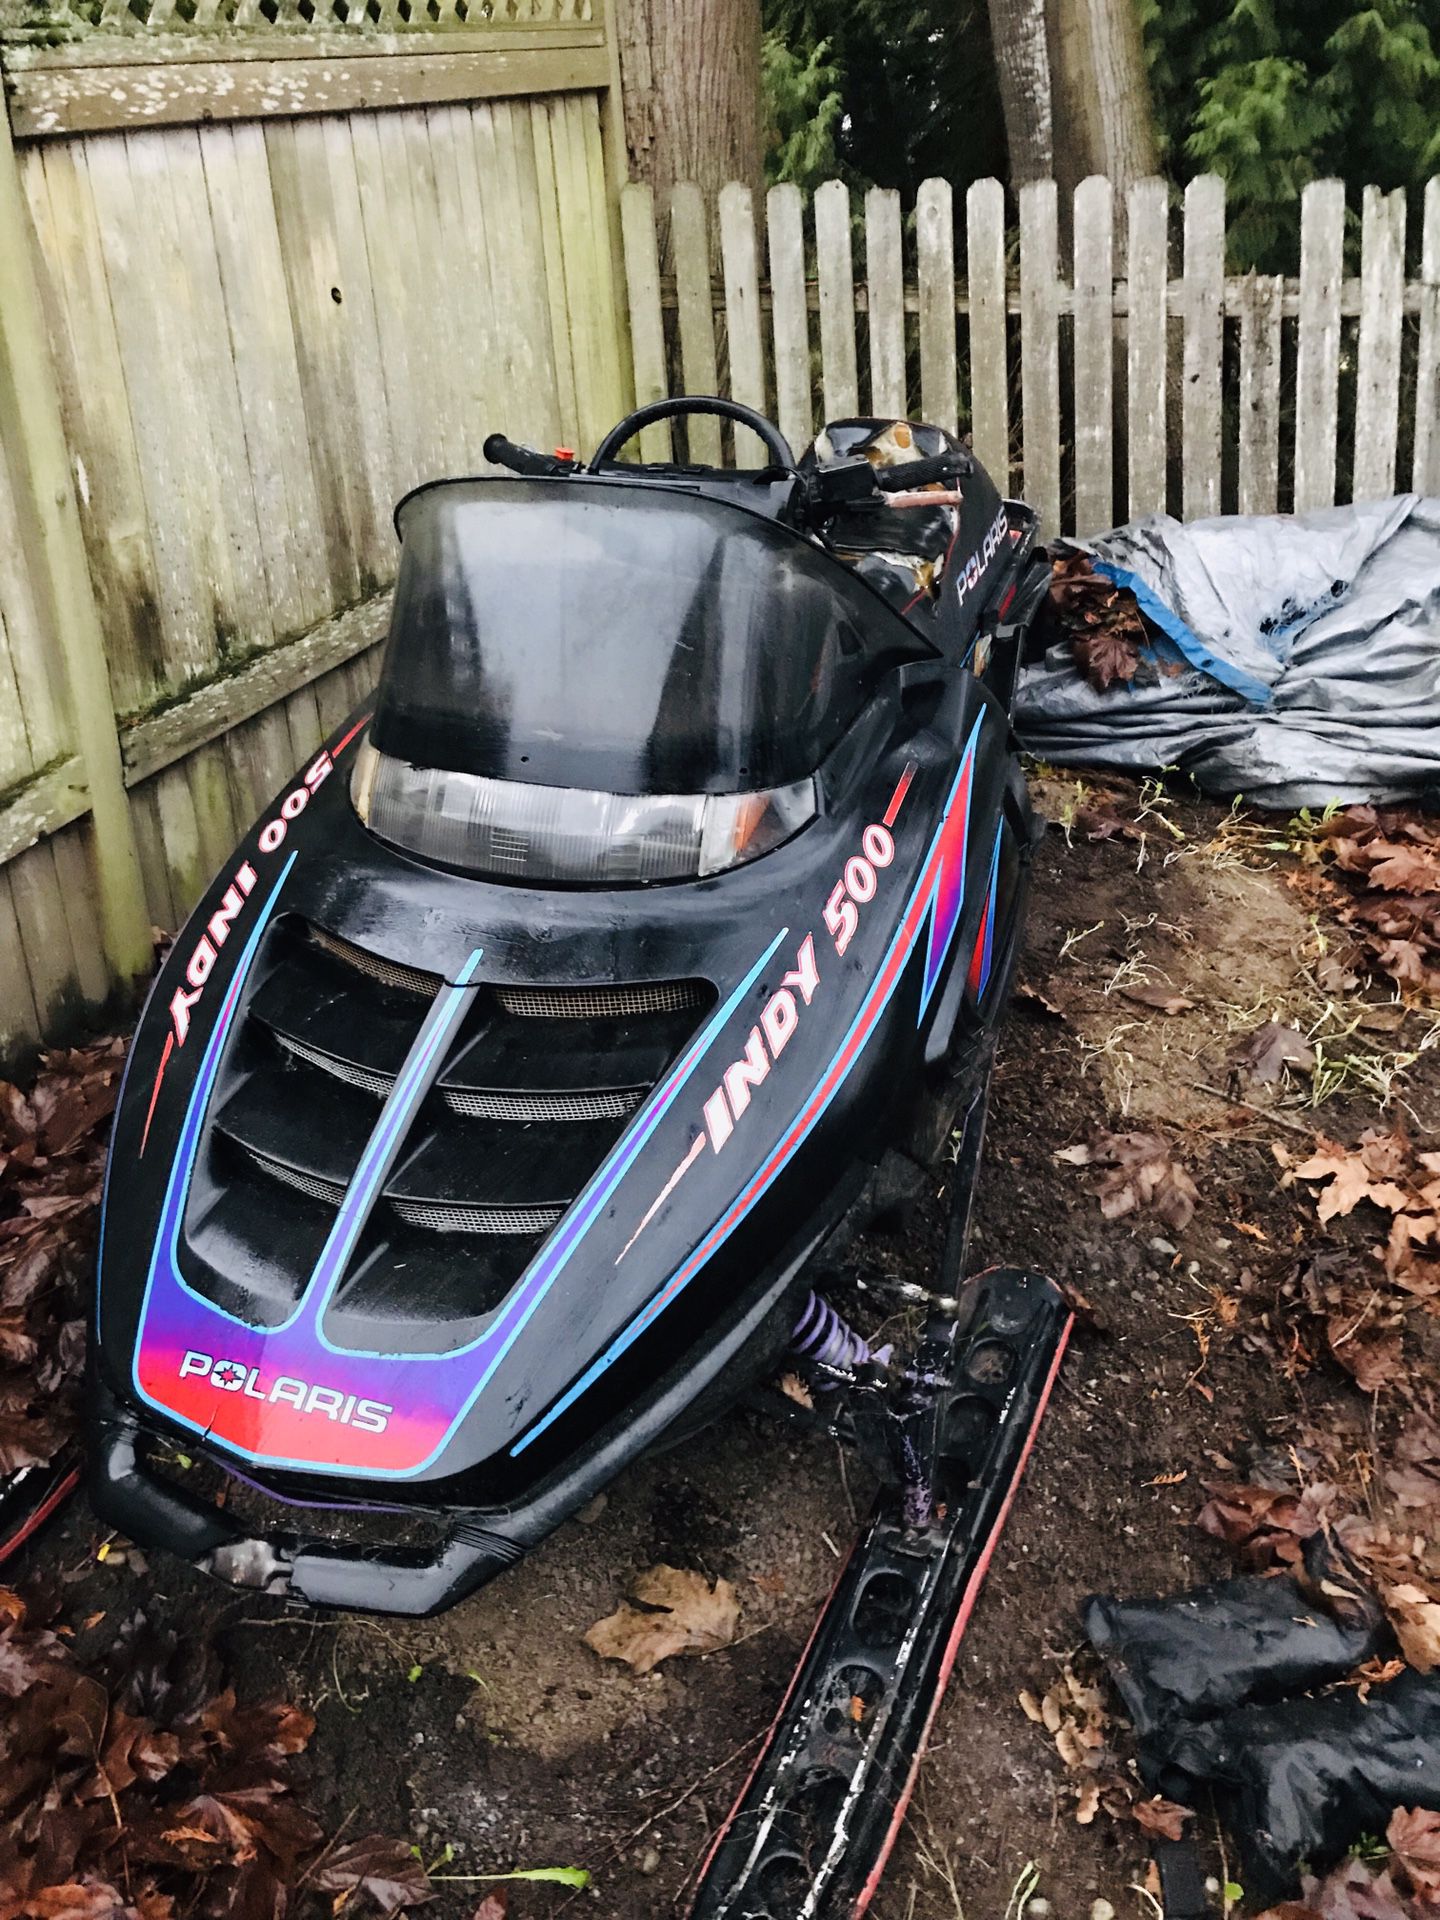 2 snowmobile’s for the price of one